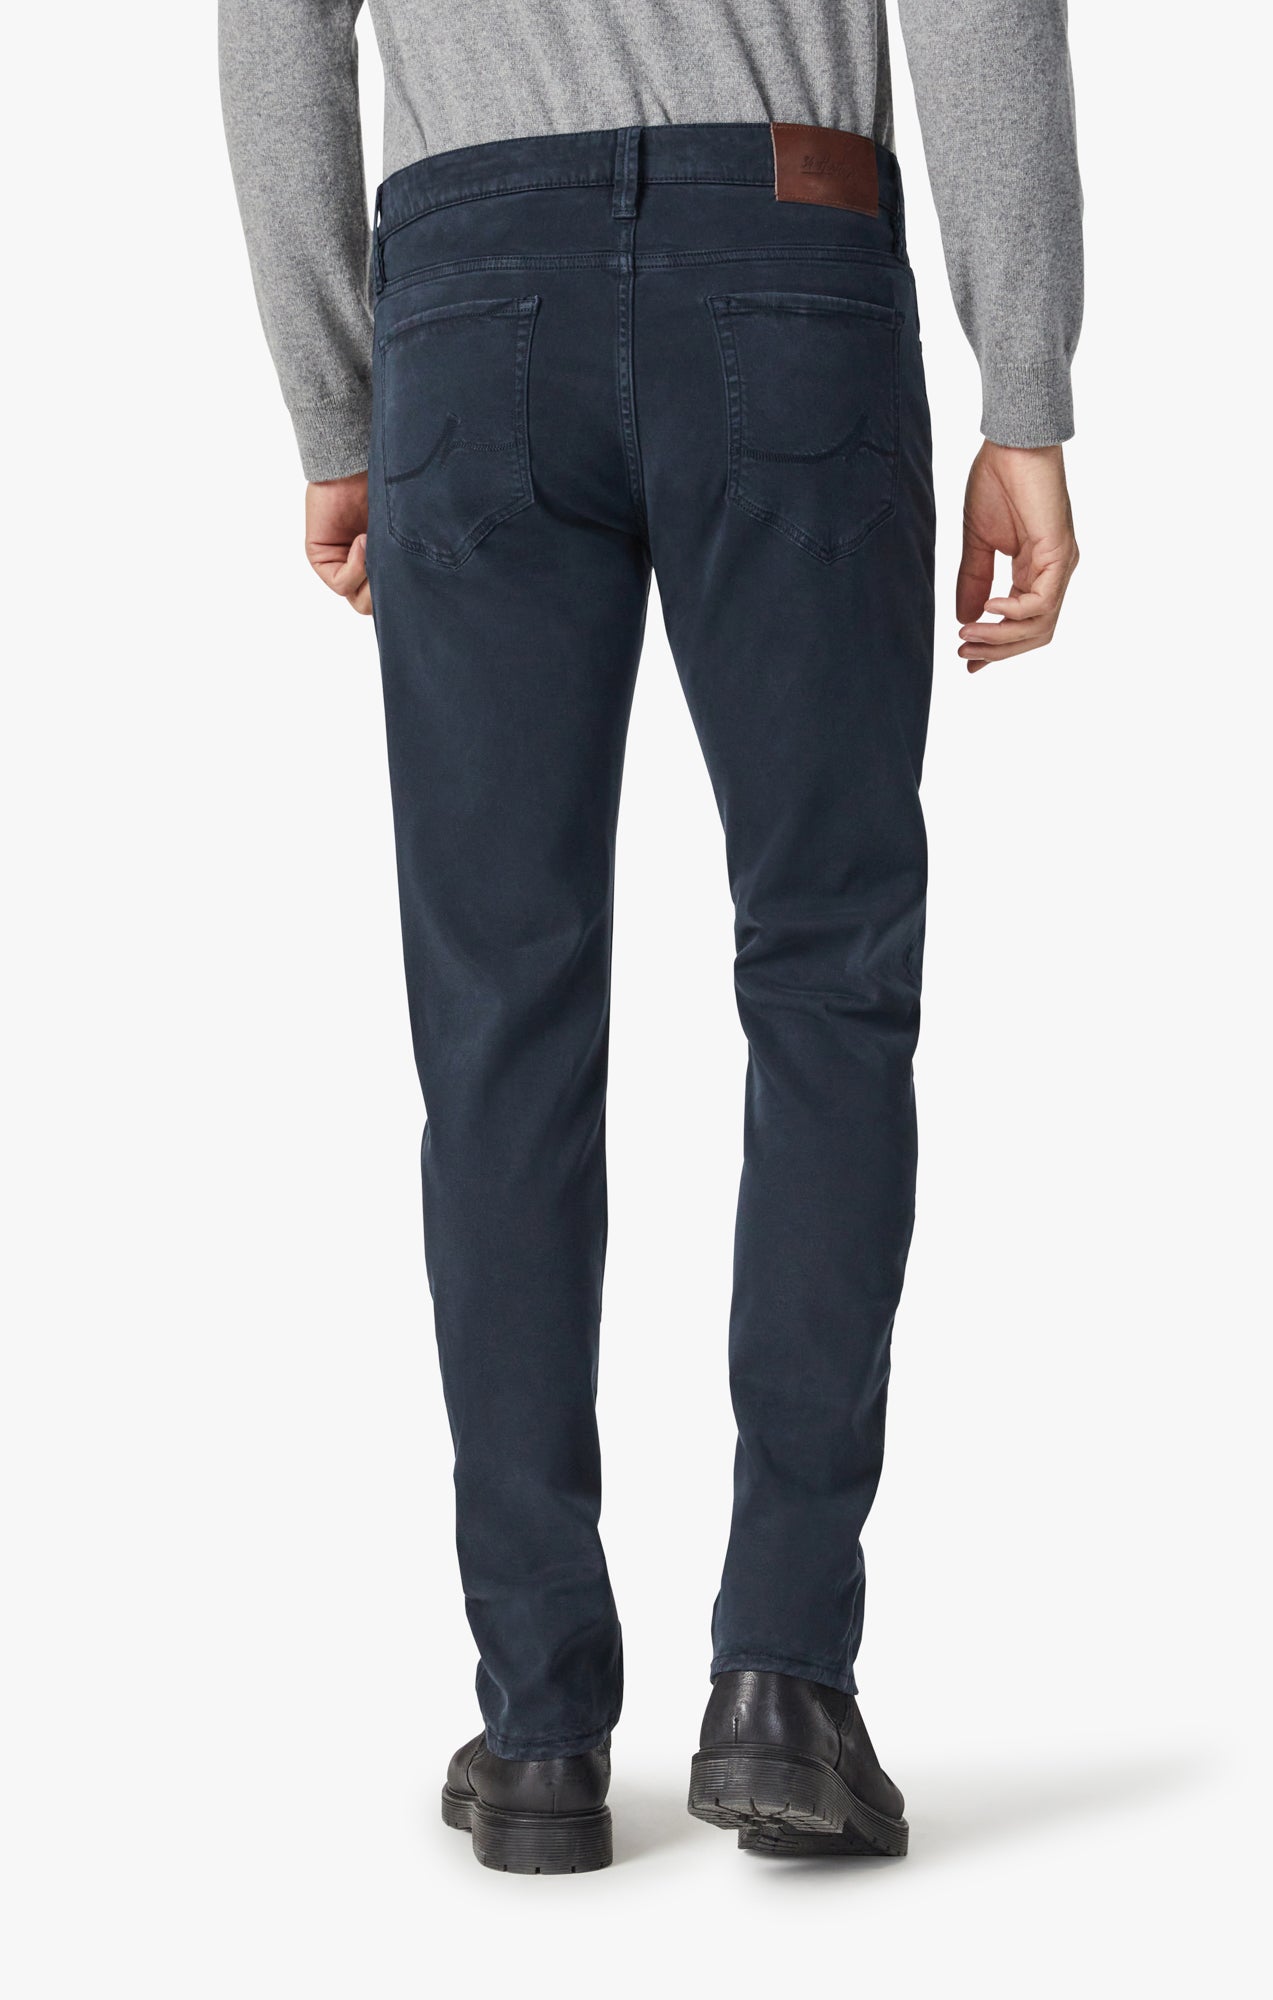 Cool Tapered Leg Pants in Navy Brushed Twill